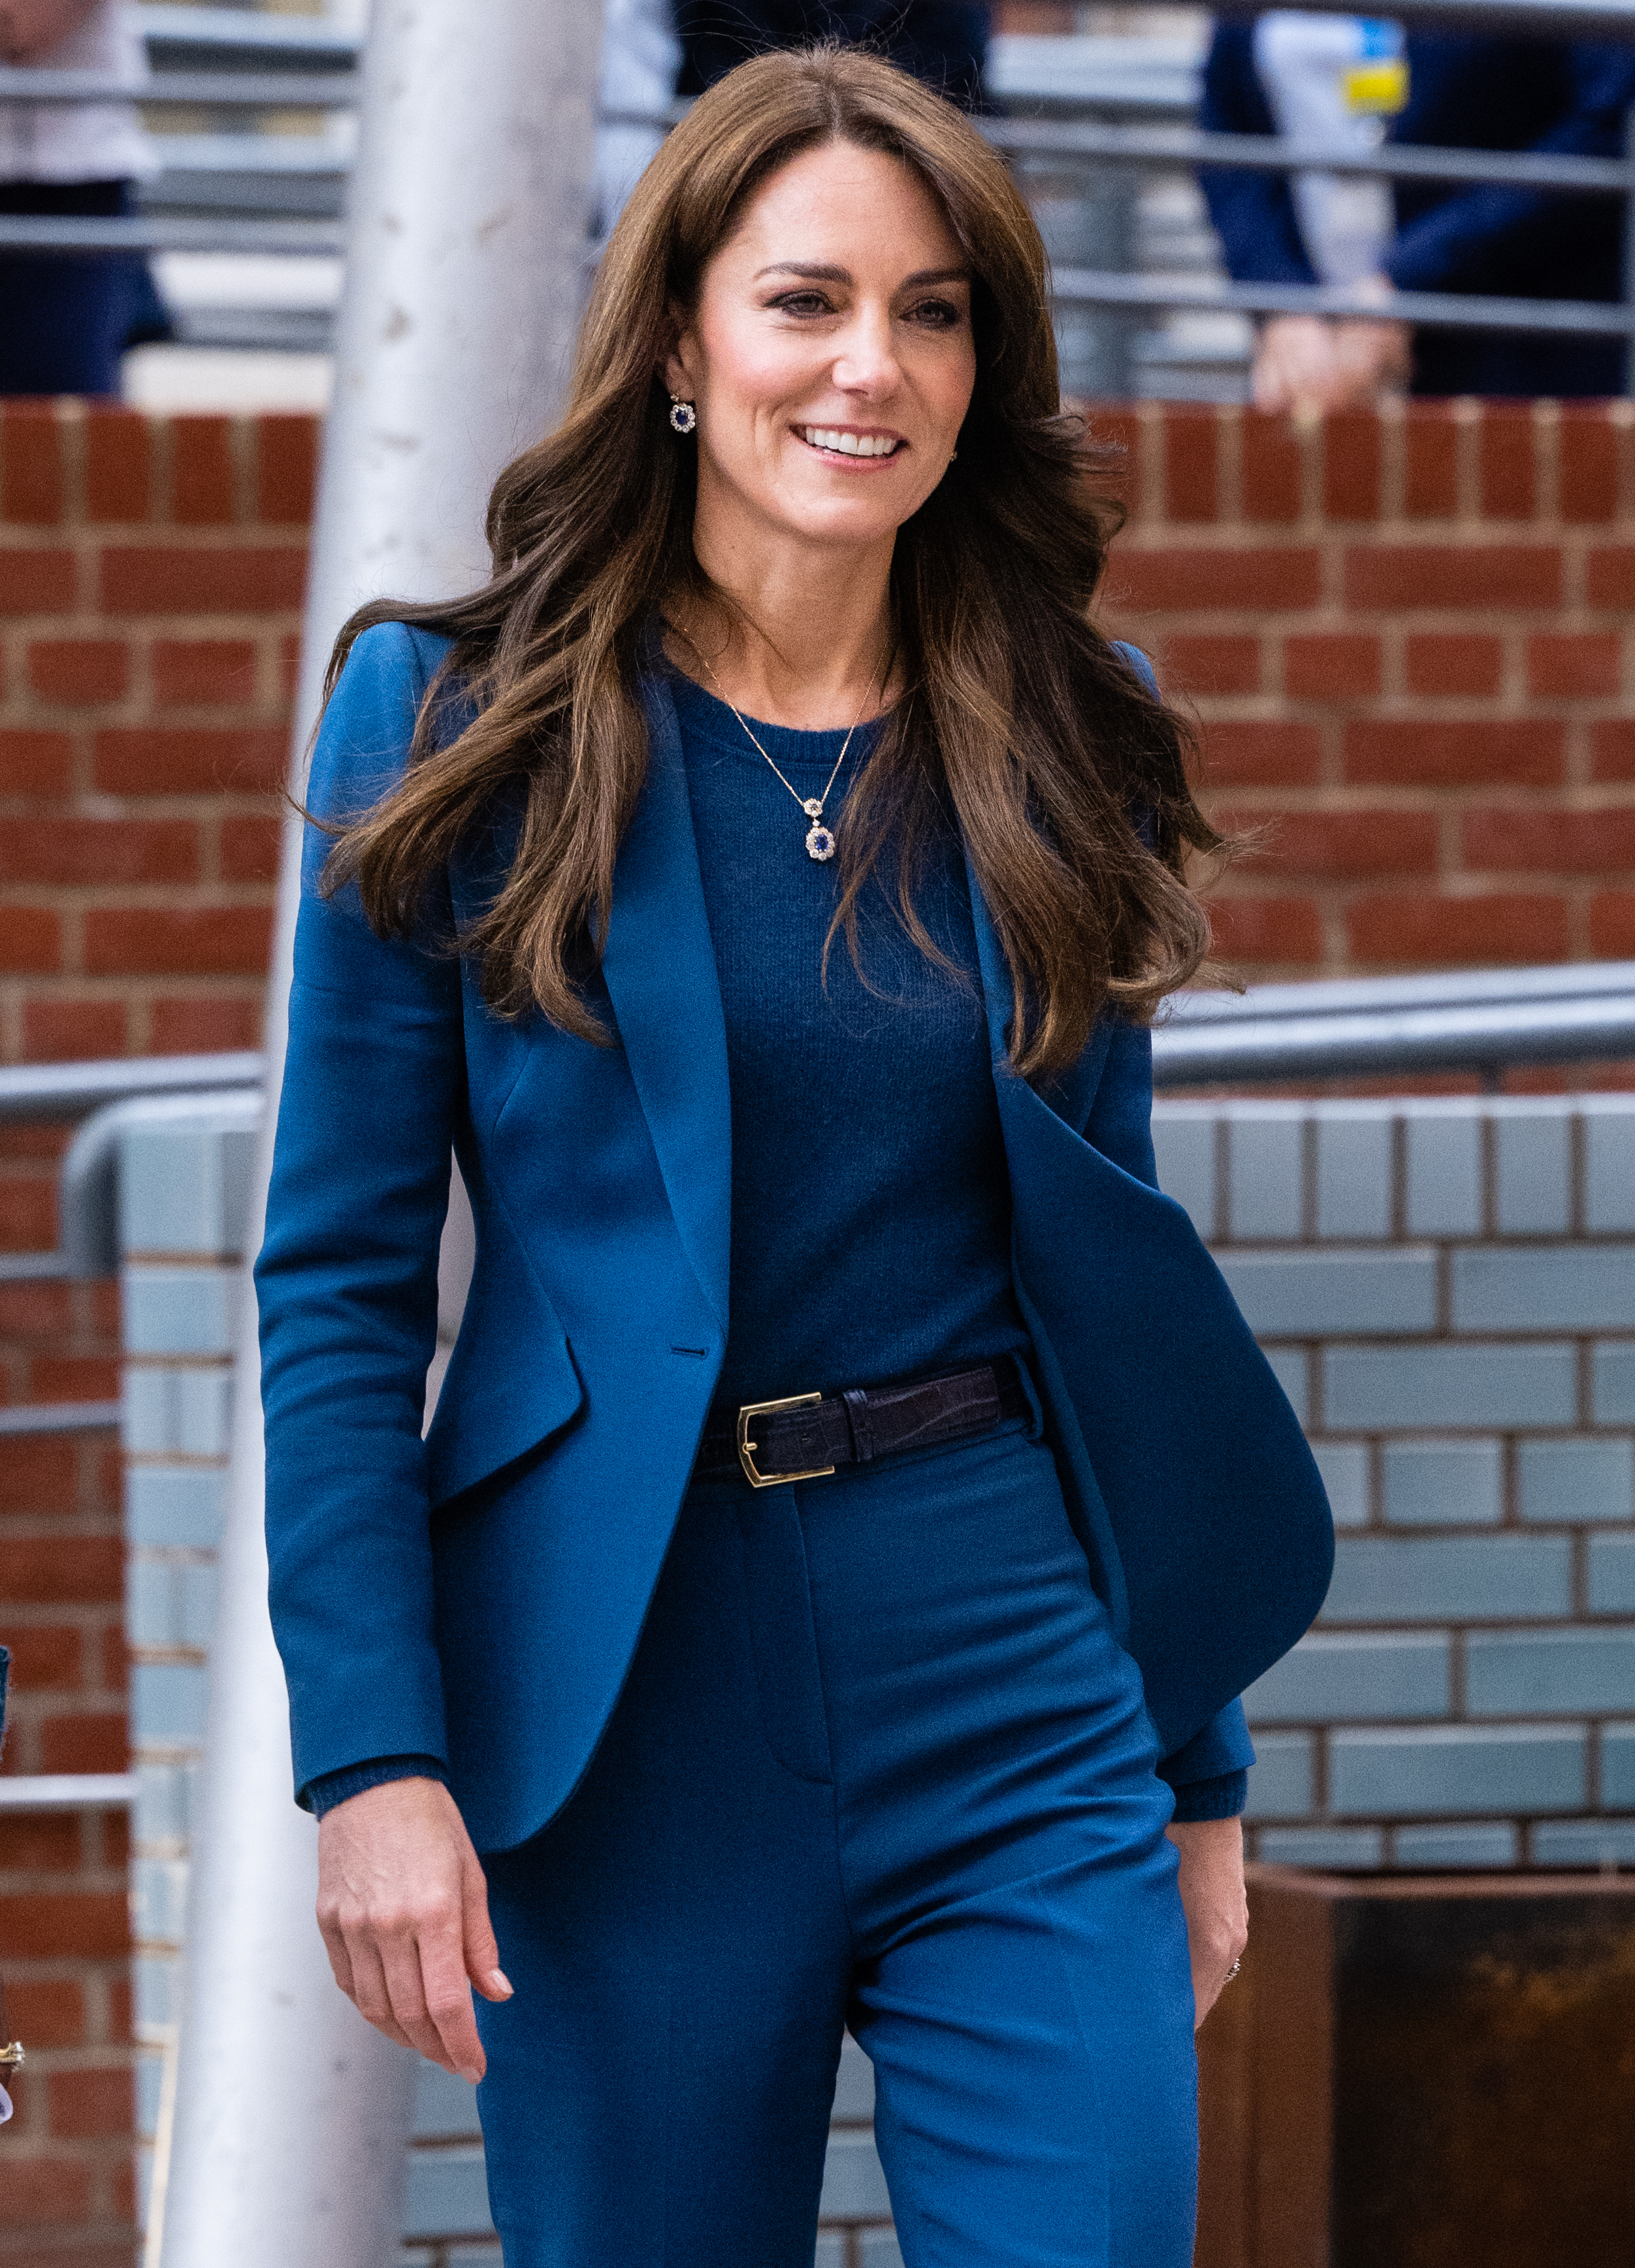 Kate in a tailored blue blazer and trousers with a smile, walking outdoors